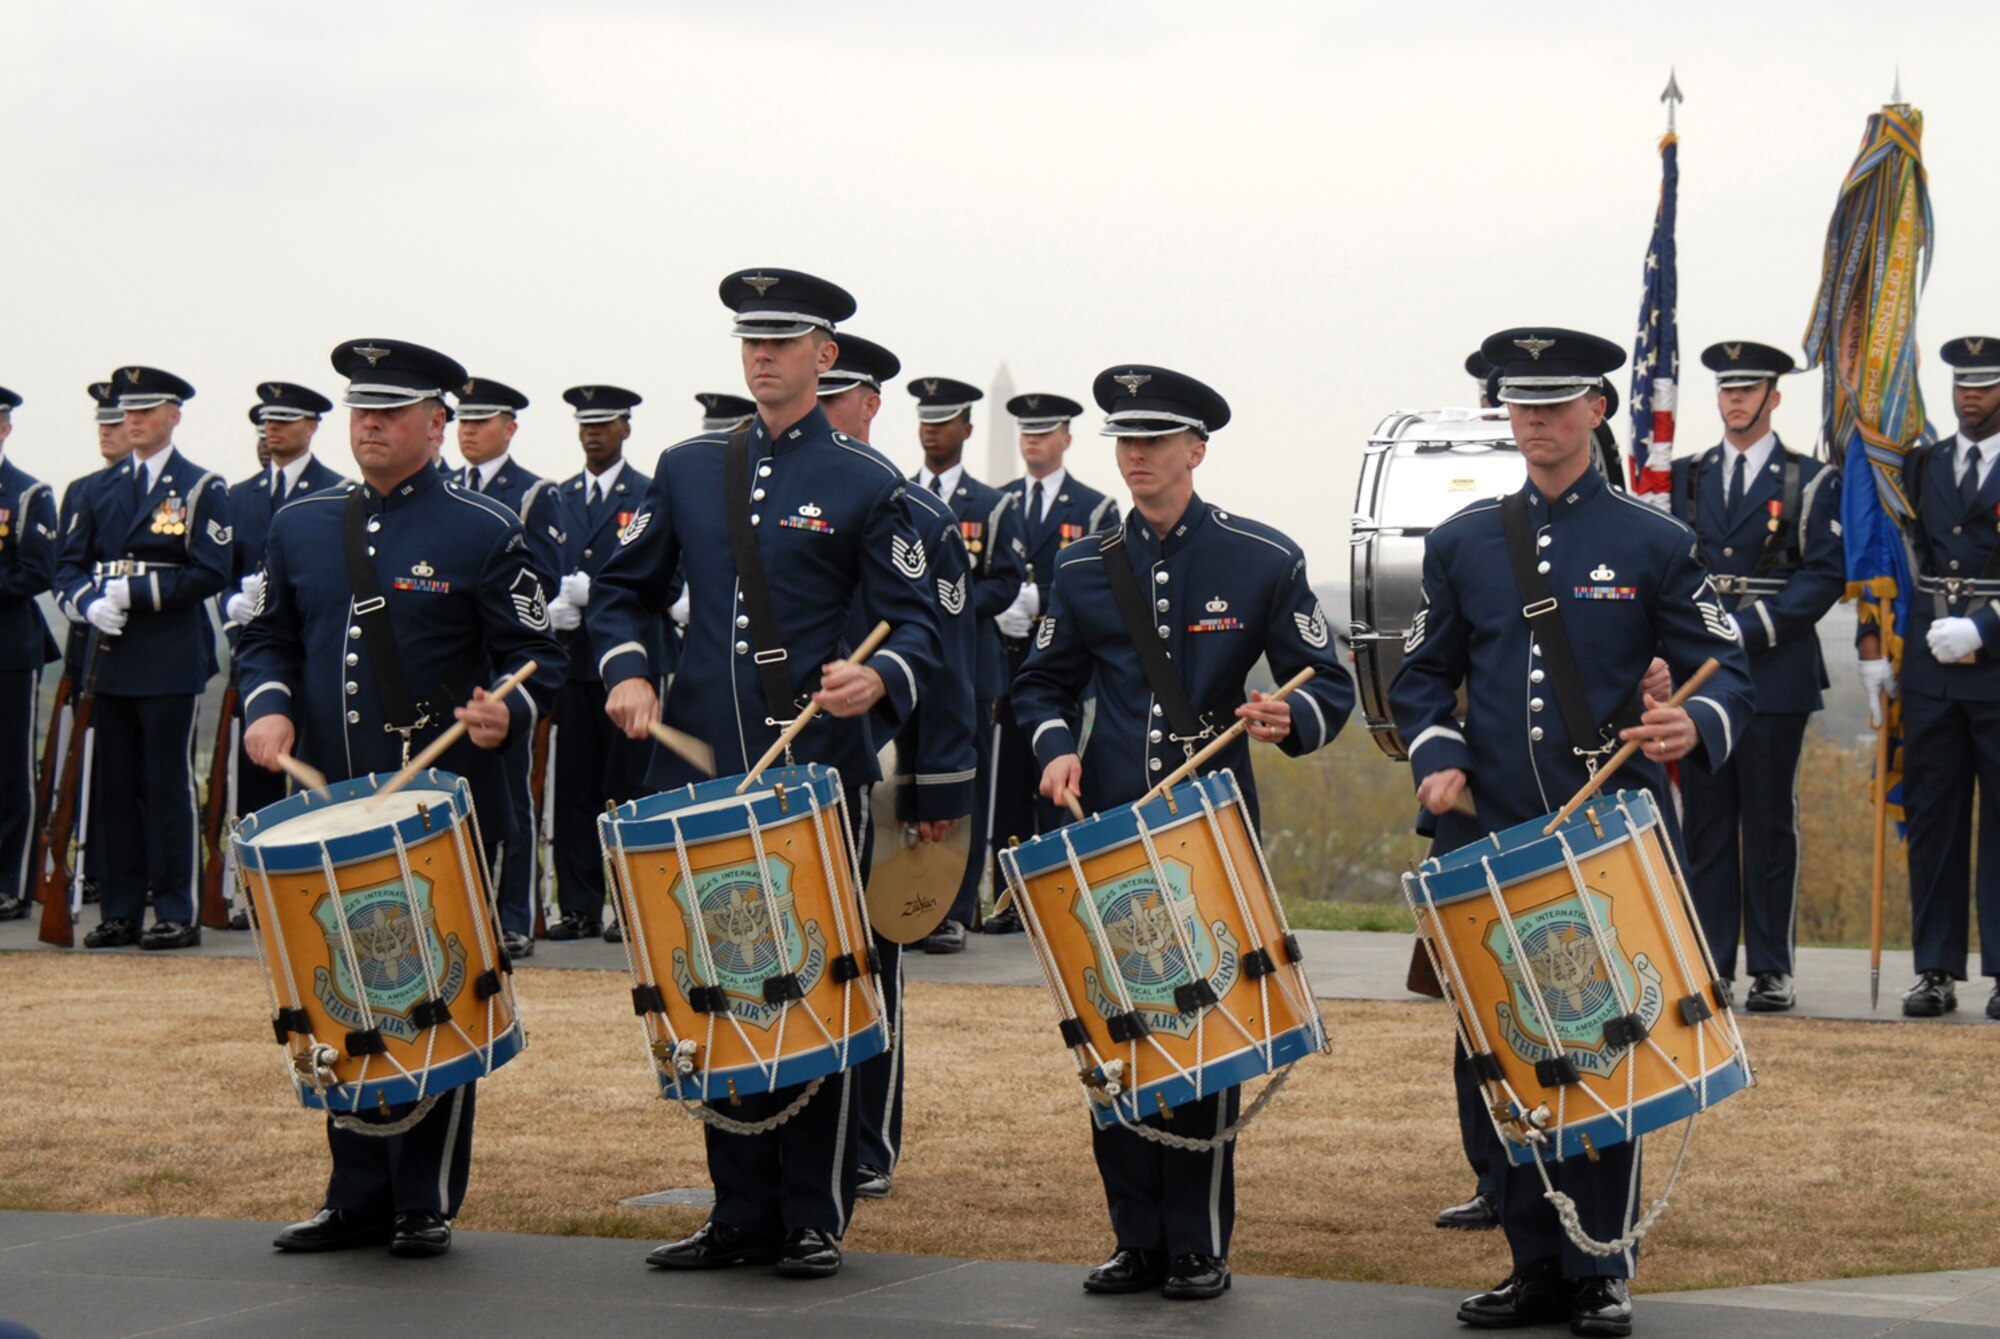 ARLINGTON, Va. -- The Air Force Honor Band performed numerous musical numbers for the Air Force Review ceremony April 14 at the Air Force Memorial.  Maj. Gen. Robert Smolen, Air Force District of Washington commander, was the host and reviewing official for the event.